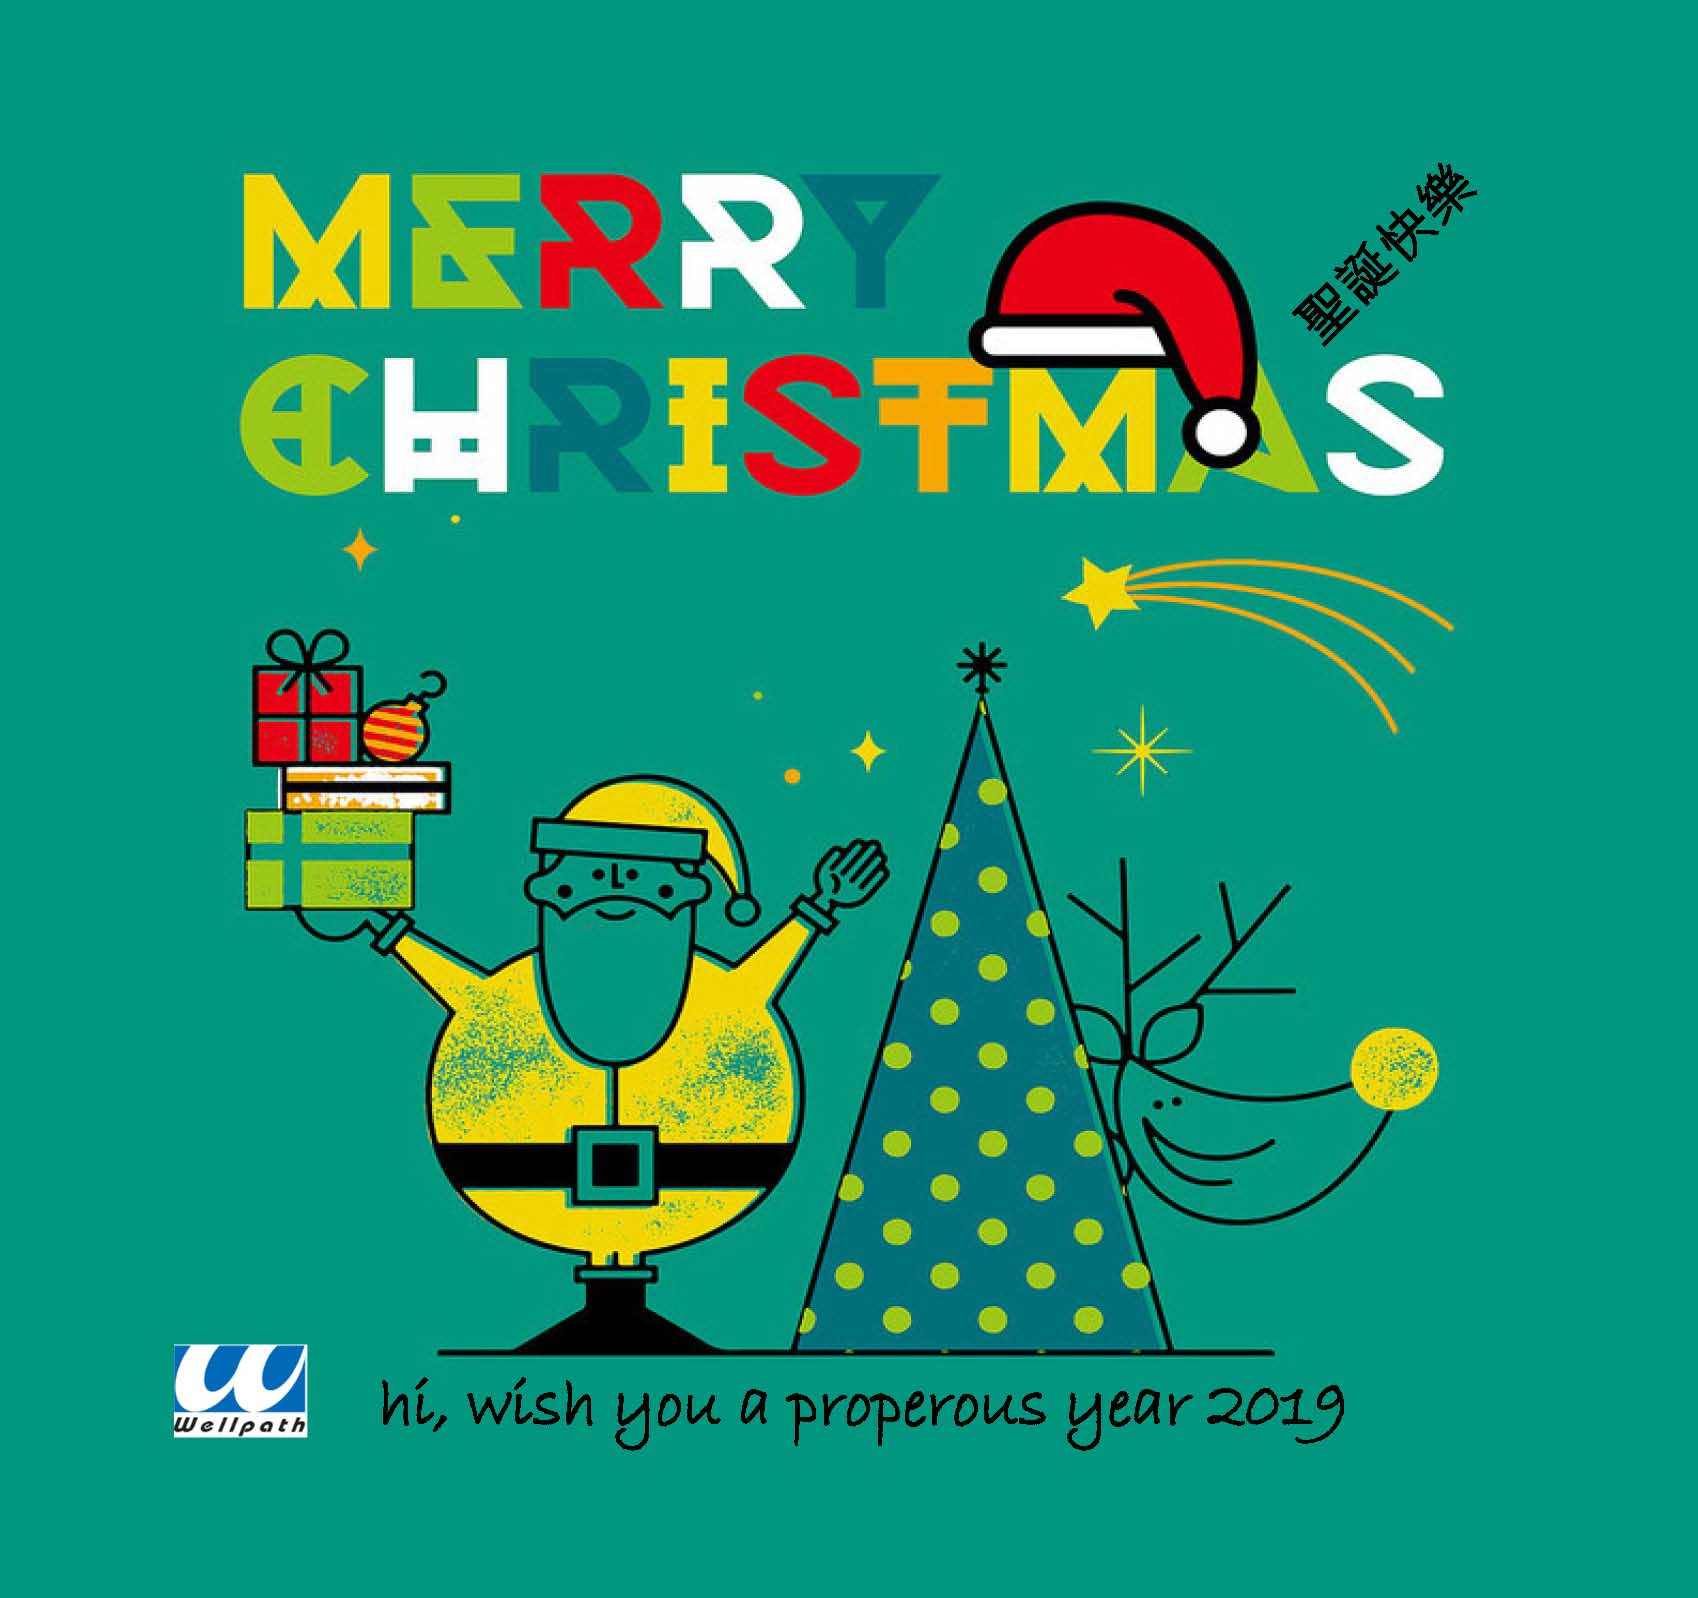 Wish you a Merry Christmas and Happy New Year